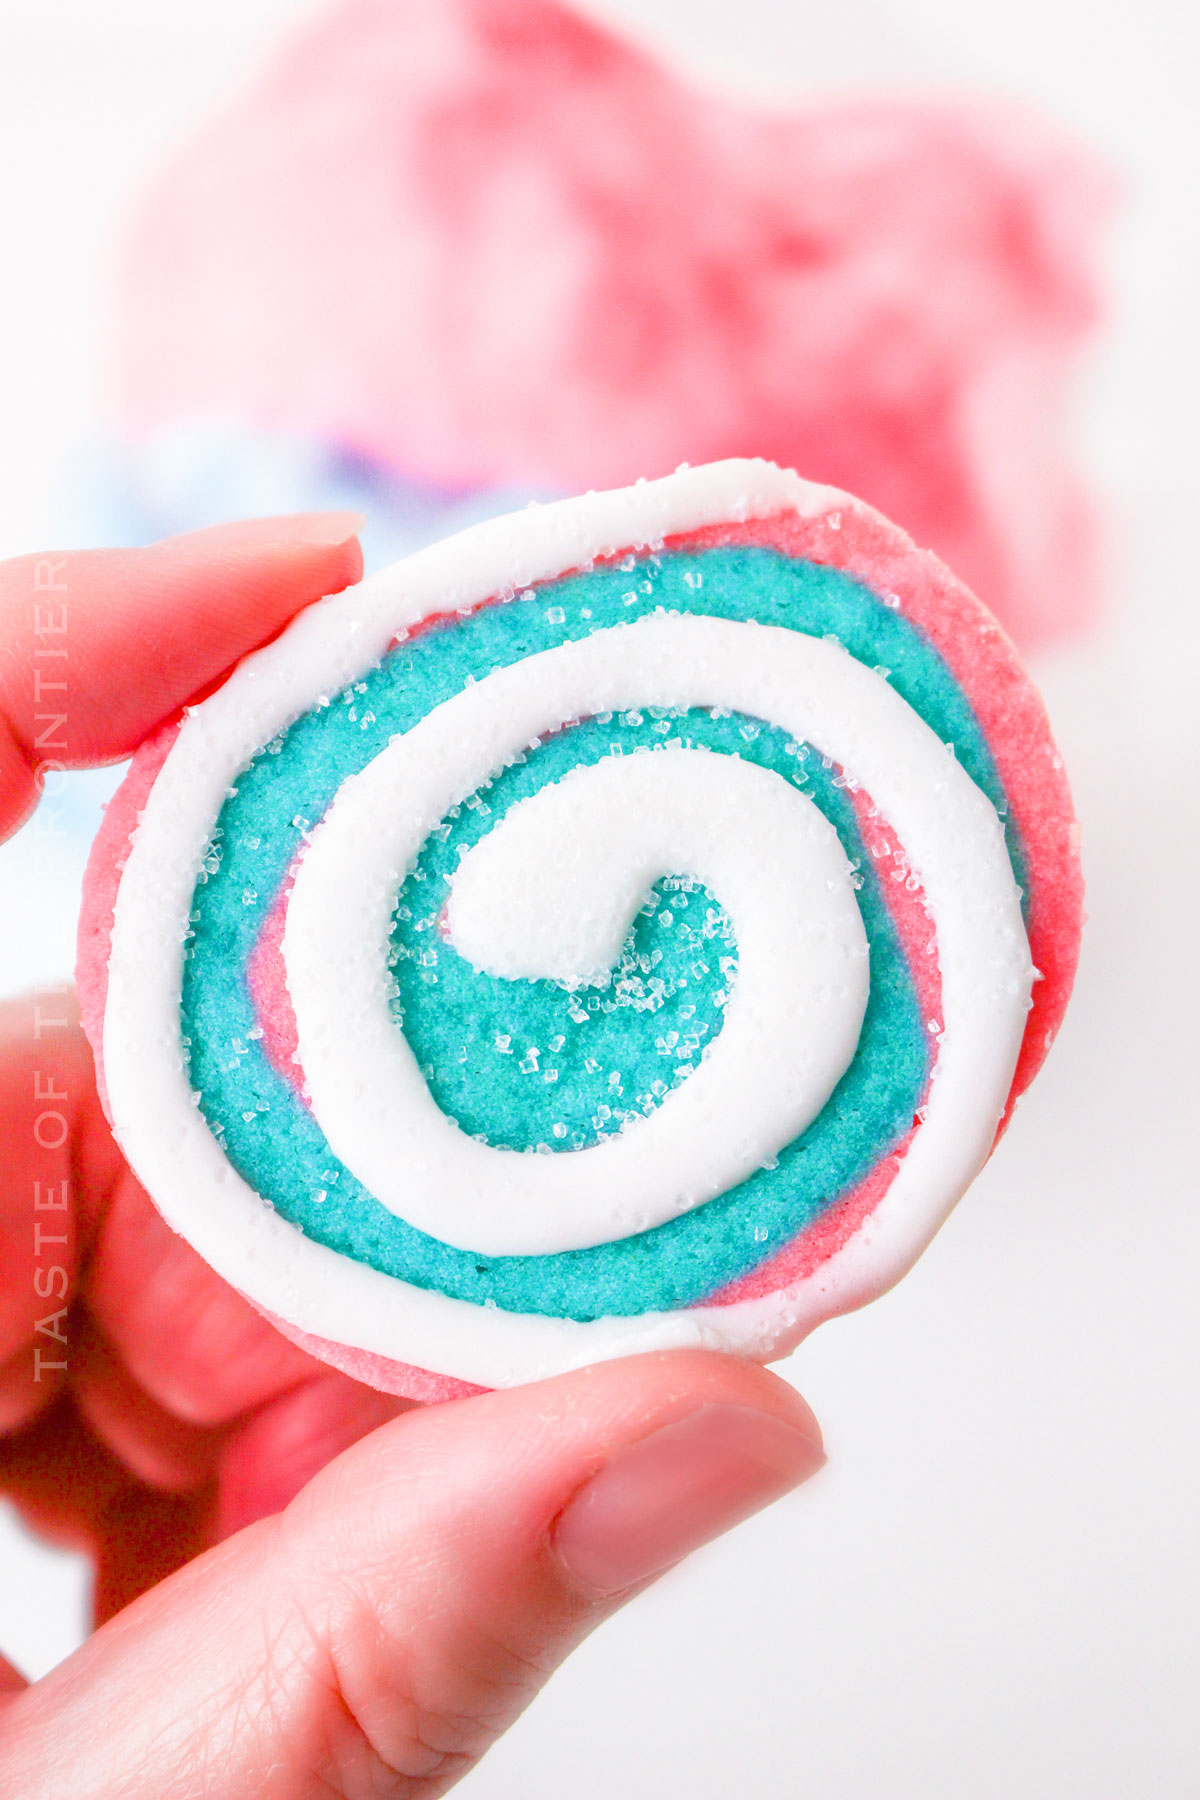 Cotton Candy Cookies